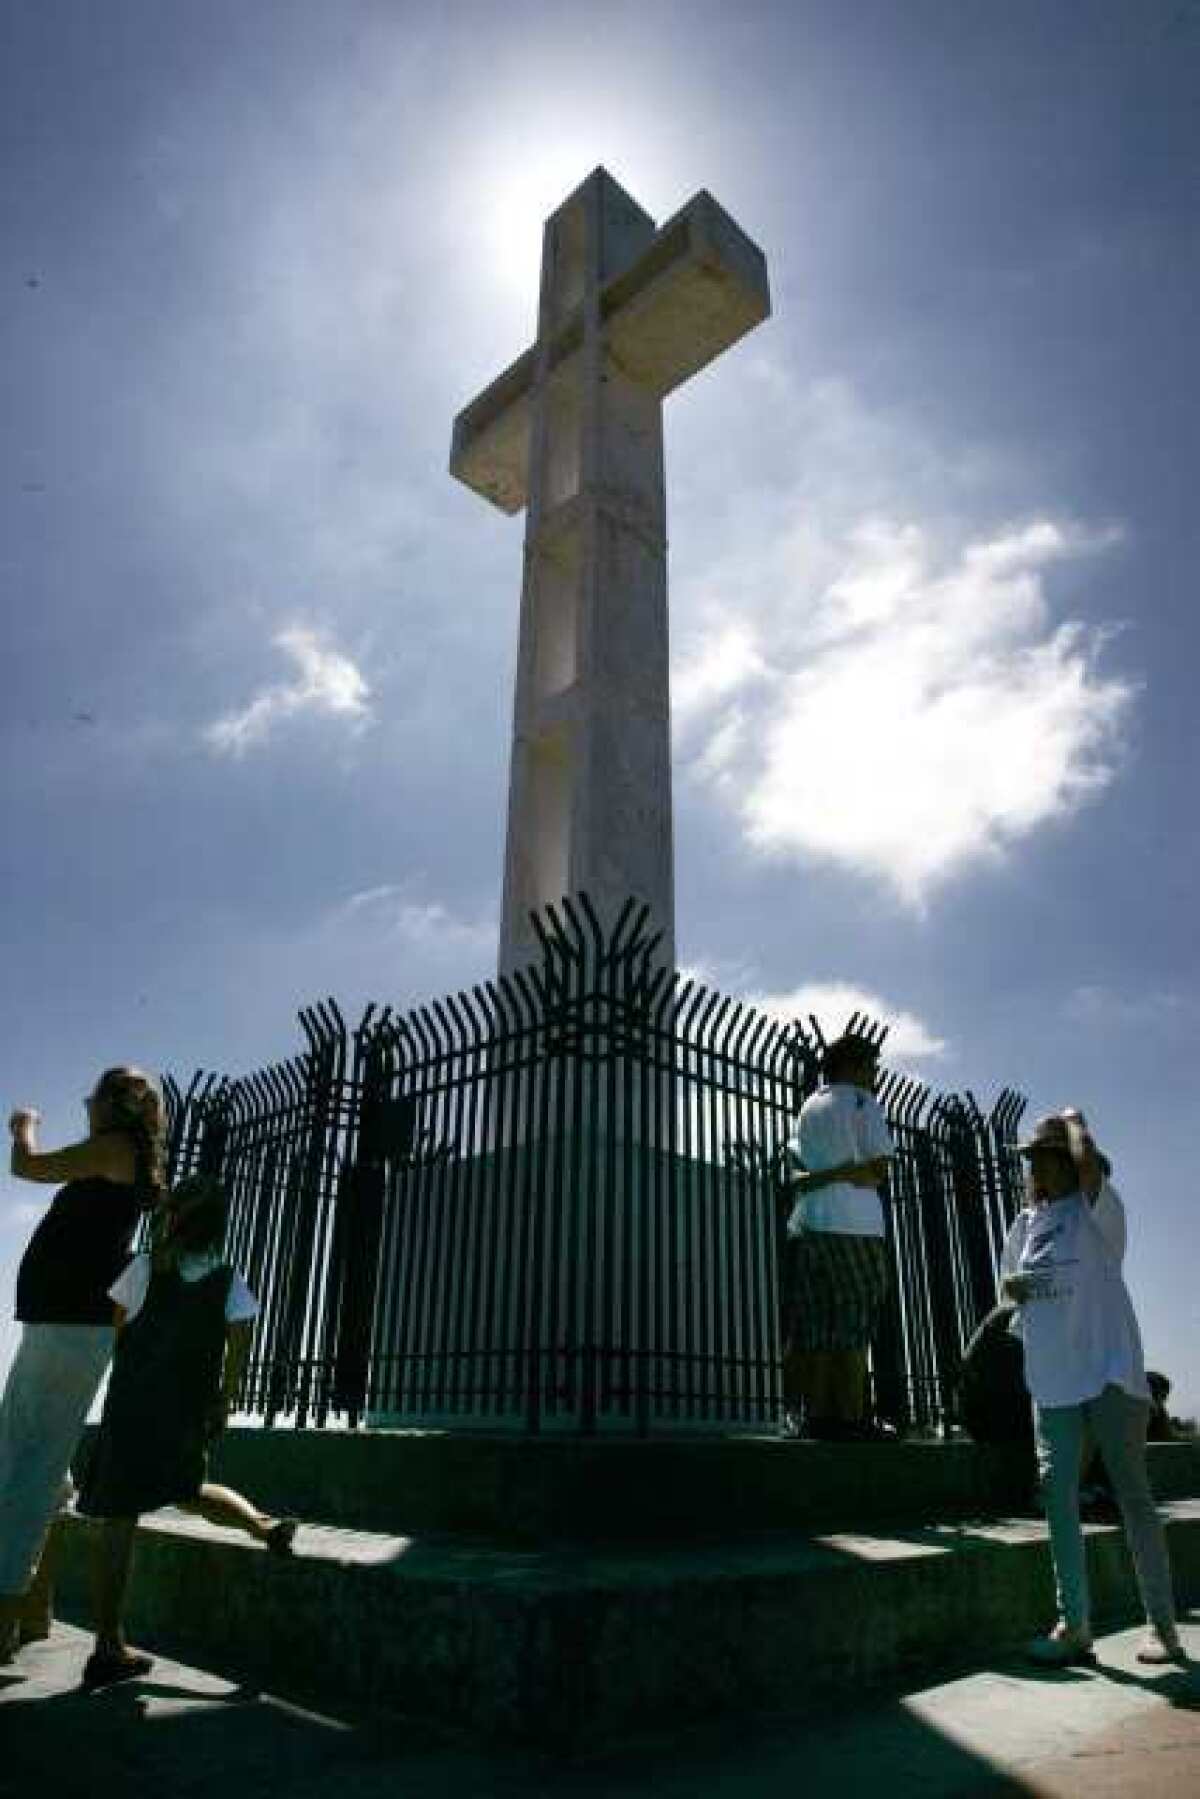 The cross atop Mt. Soledad in San Diego has been at the center of a political and legal dispute for more than two decades. A judge Thursday ordered it taken down as a violation of the separation of church and state. But he has allowed time for appeals.